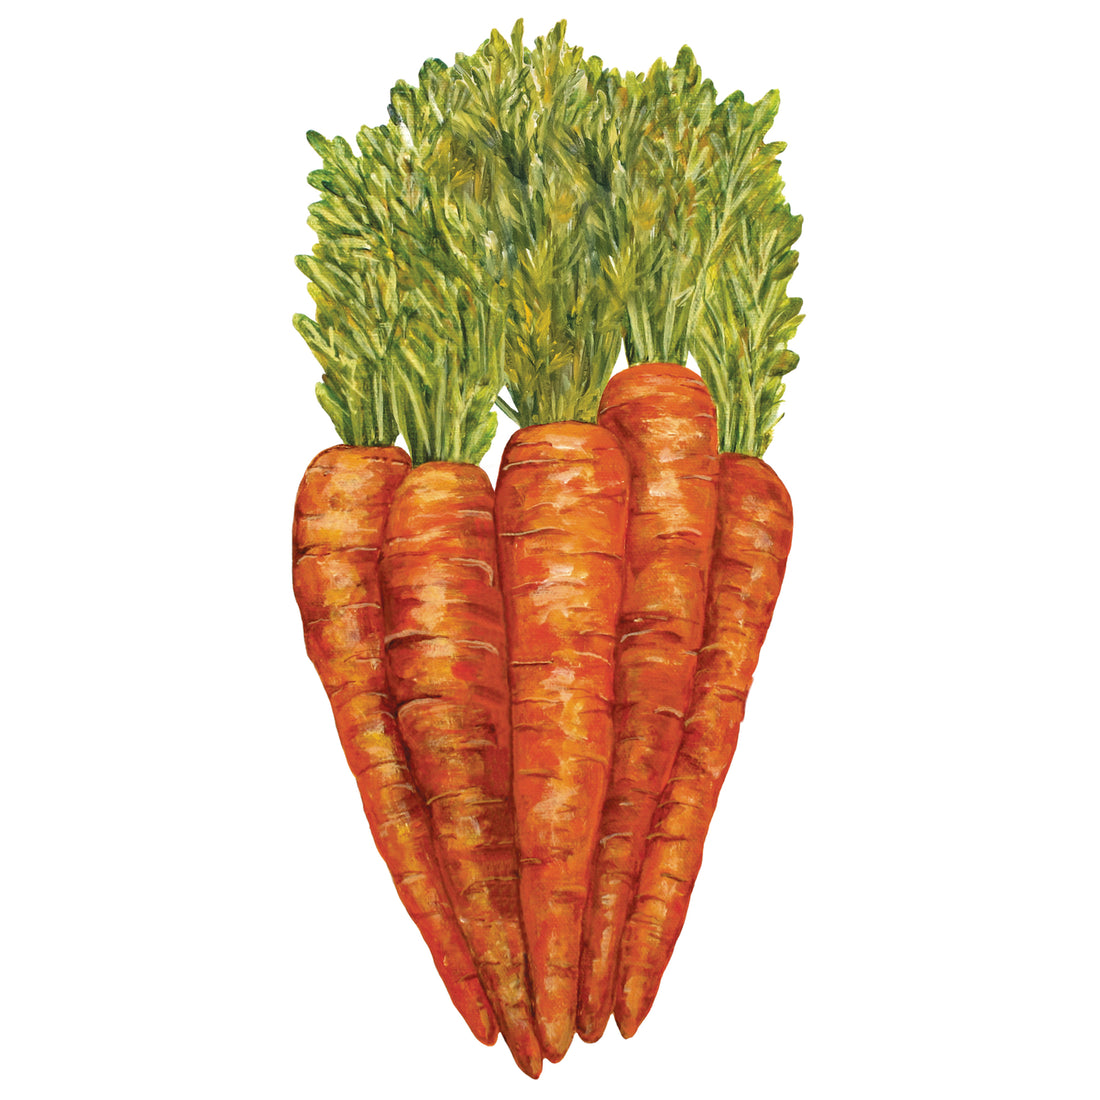 A die-cut illustration of five orange carrots with bright green leaves bundled together.